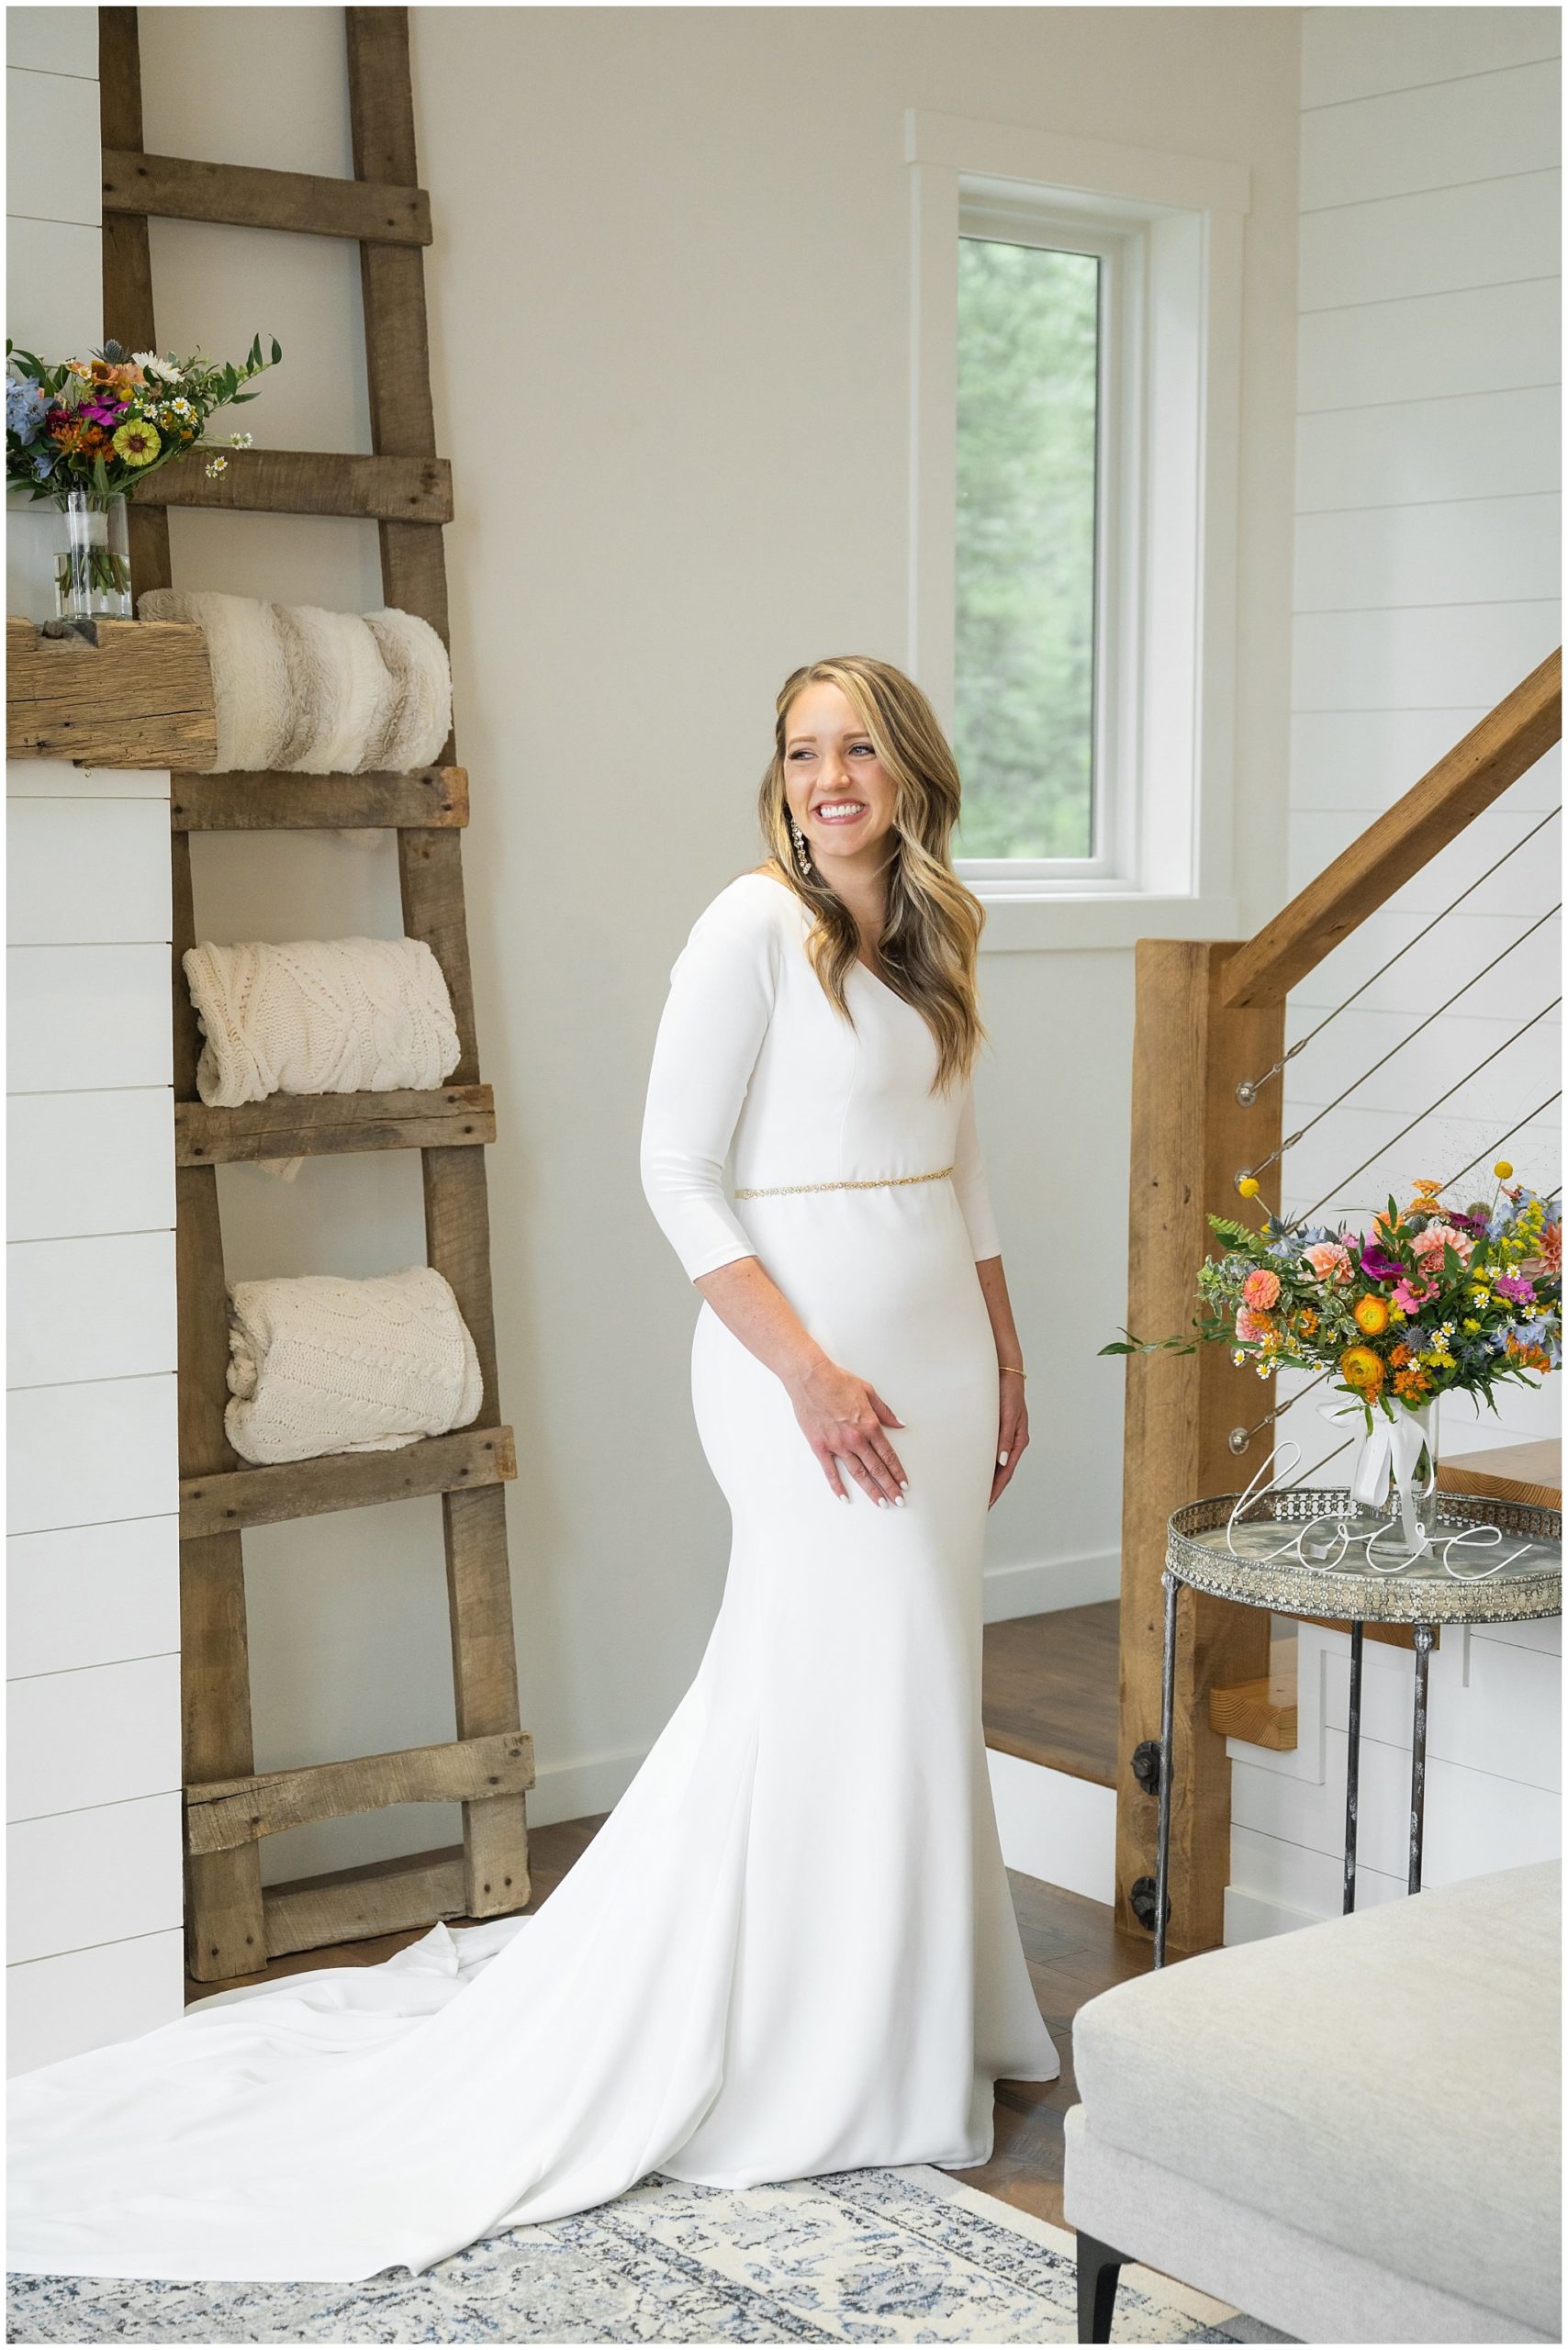 Bride in elegant fitted dress getting ready inside modern cabin | Mountainside Weddings Kalispell Montana Destination Wedding | Jessie and Dallin Photography